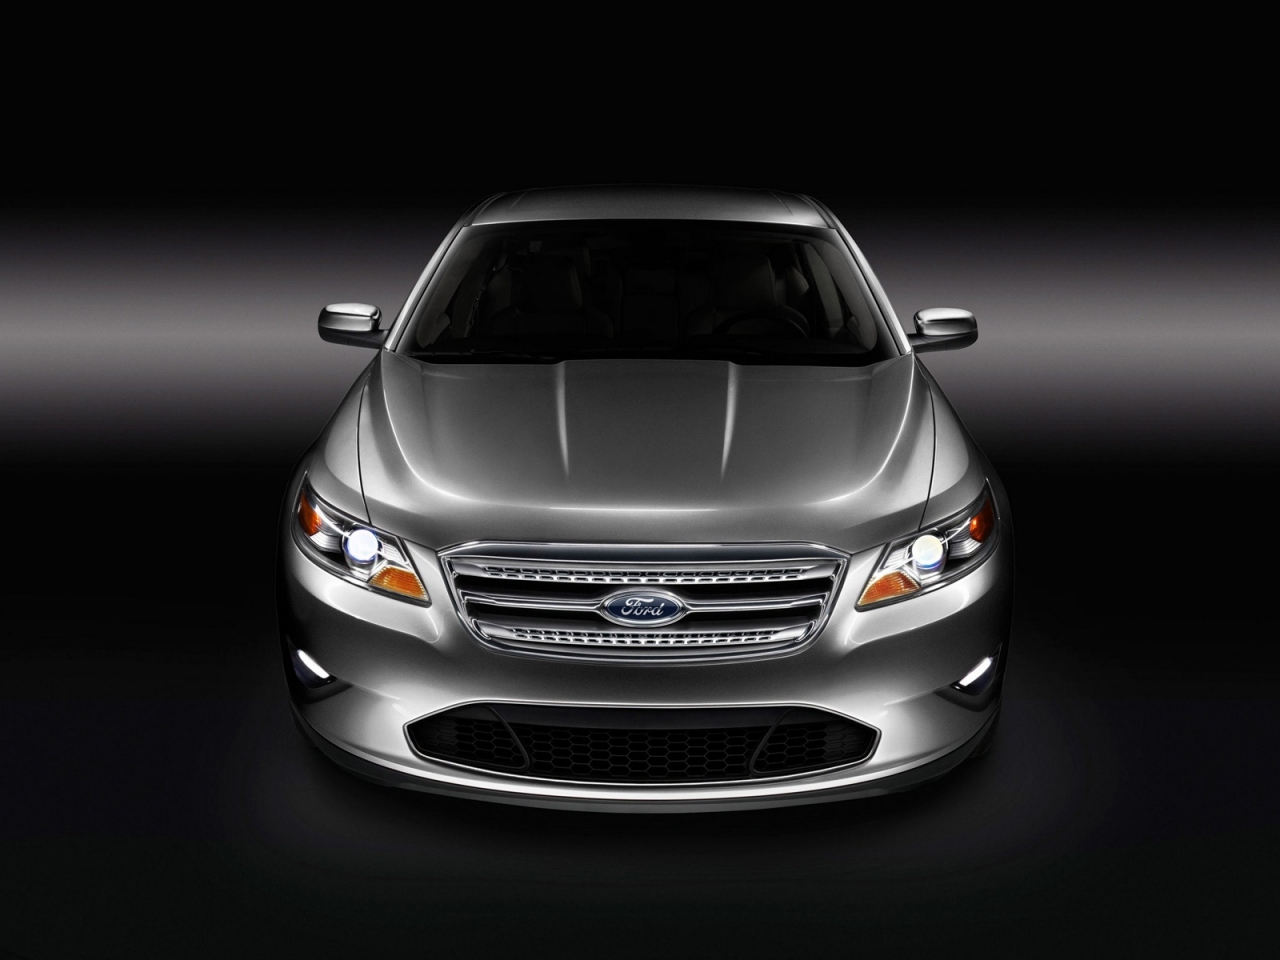 Ford Taurus 2010 for 1280 x 960 resolution